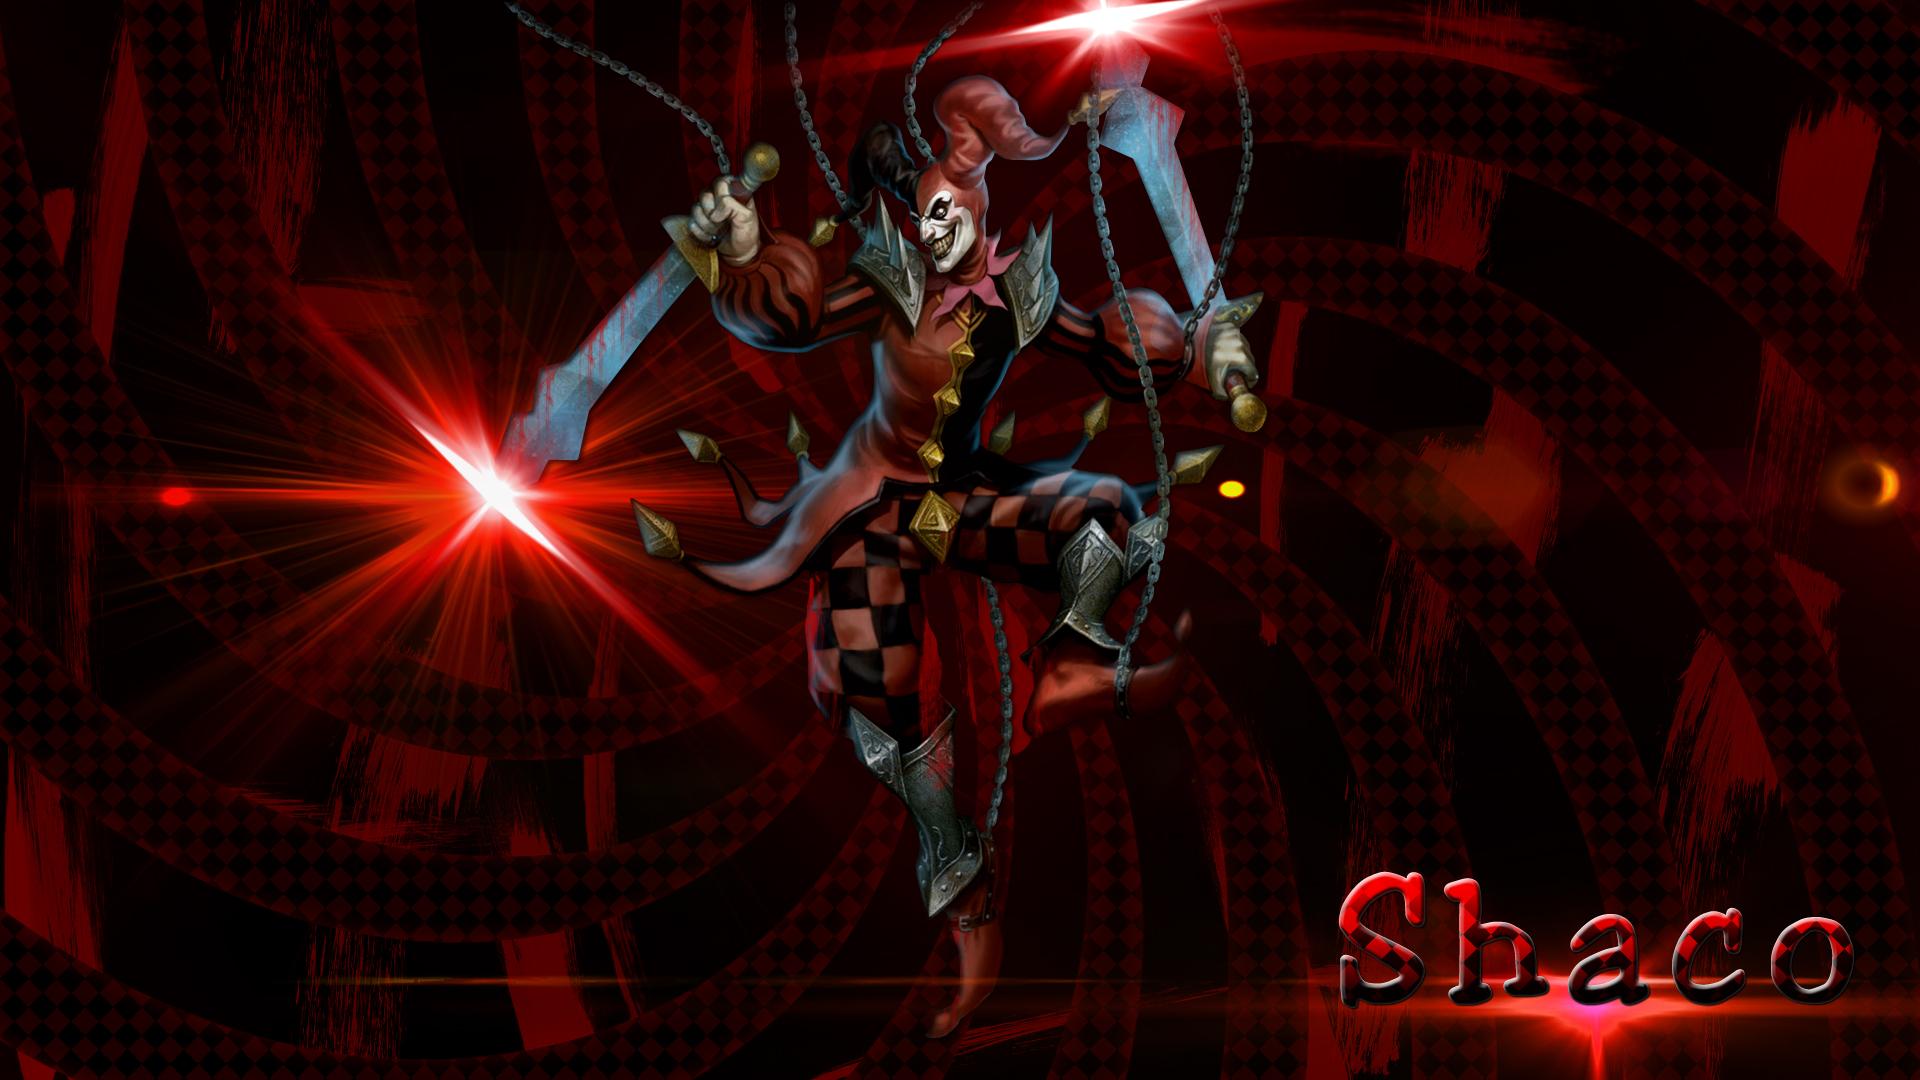 1920 x 1080 · jpeg - Shaco Wallpaper by Chipinators - League of Legends Wallpapers